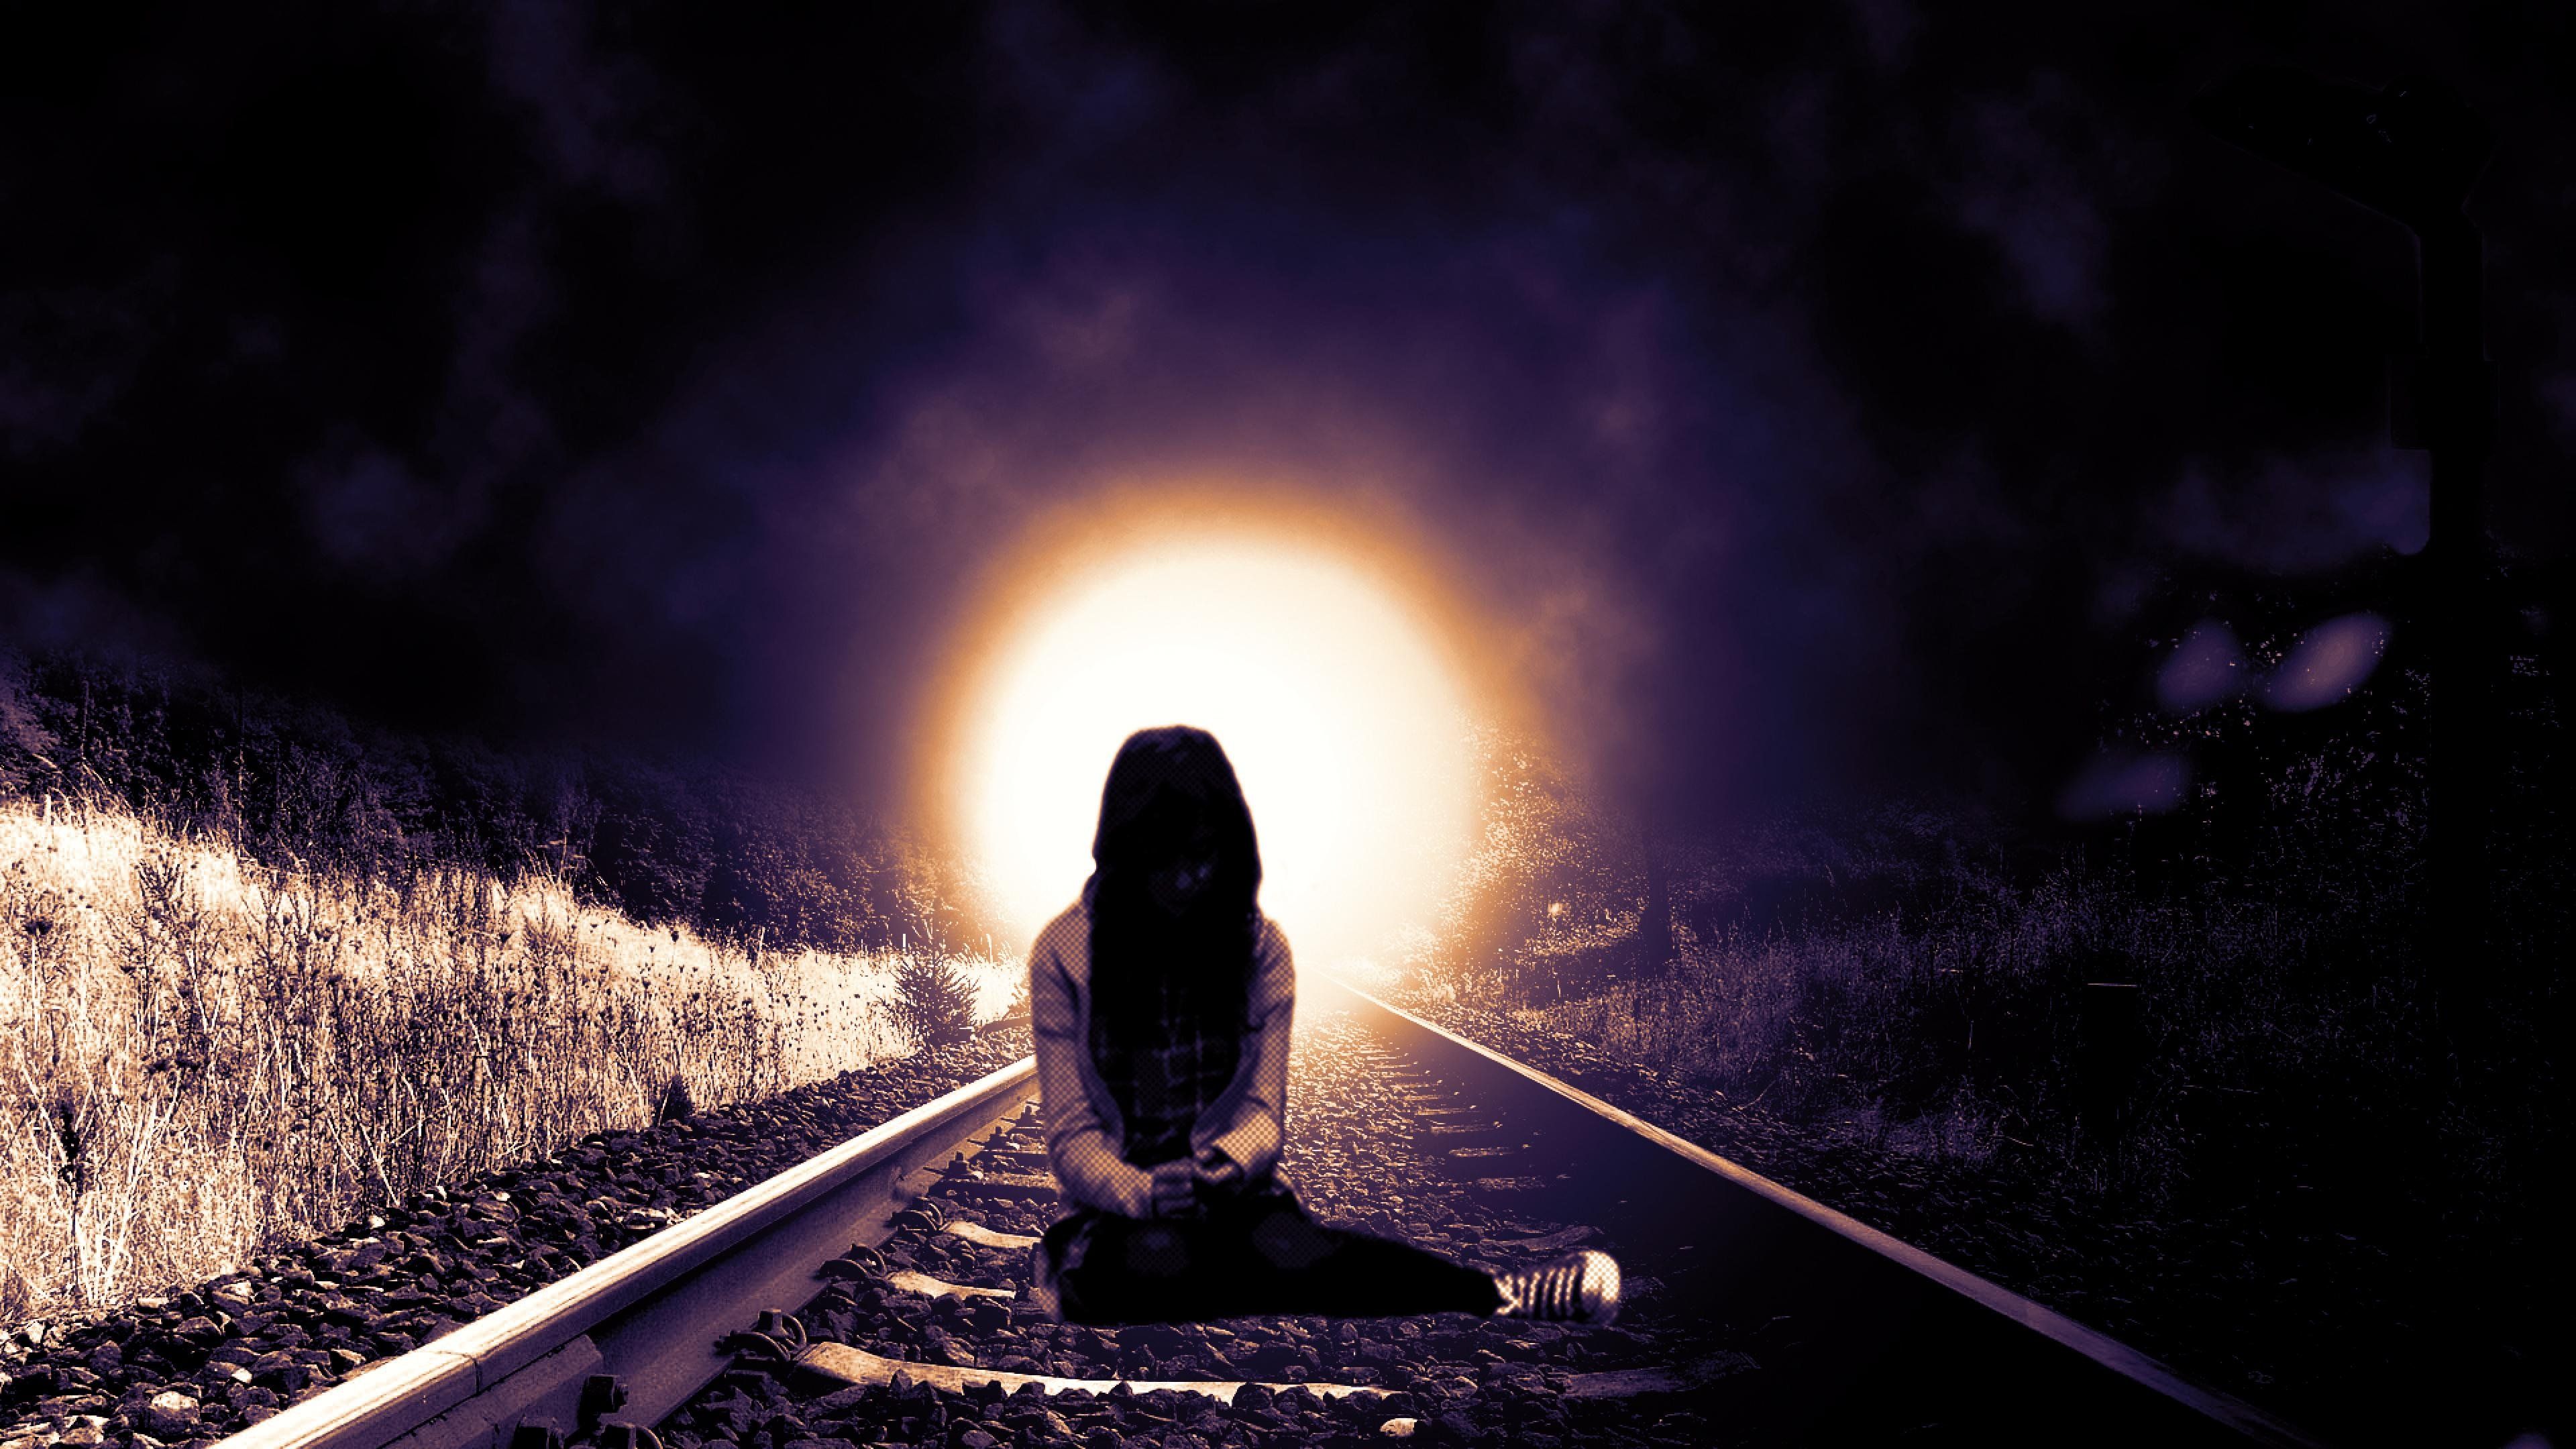 lonely, Mood, Sad, Alone, Sadness, Emotion, People, Loneliness, Solitude, Sorrow, Girl, Train, Tracks, Railroad, Suicide, Death, Emo Wallpaper HD / Desktop and Mobile Background